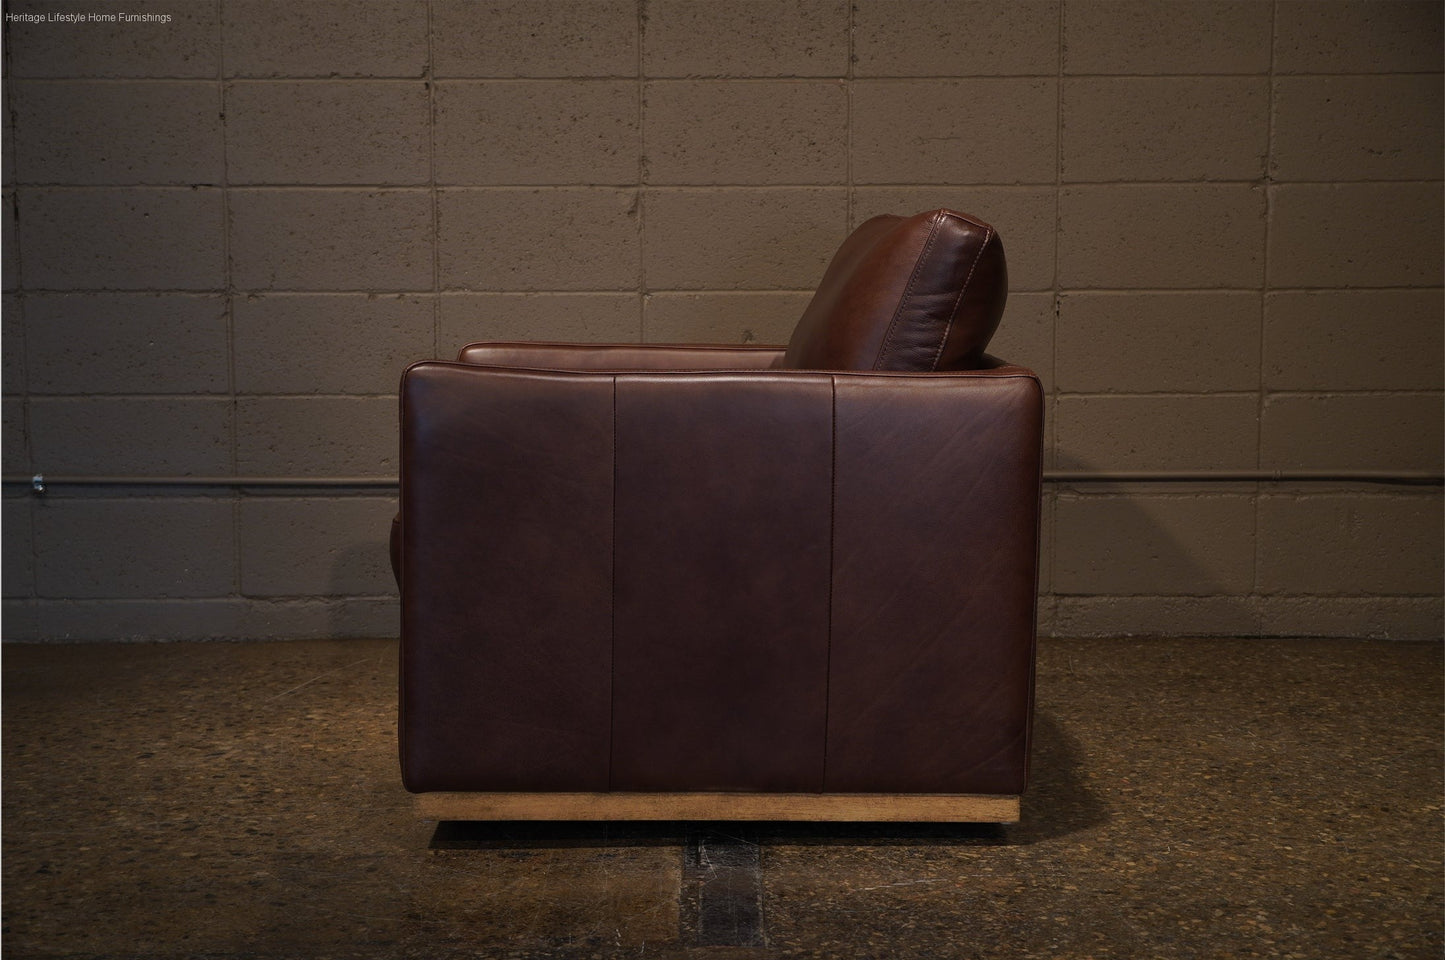 Leather Swivel Chair Furniture Stores Ontario Near Me